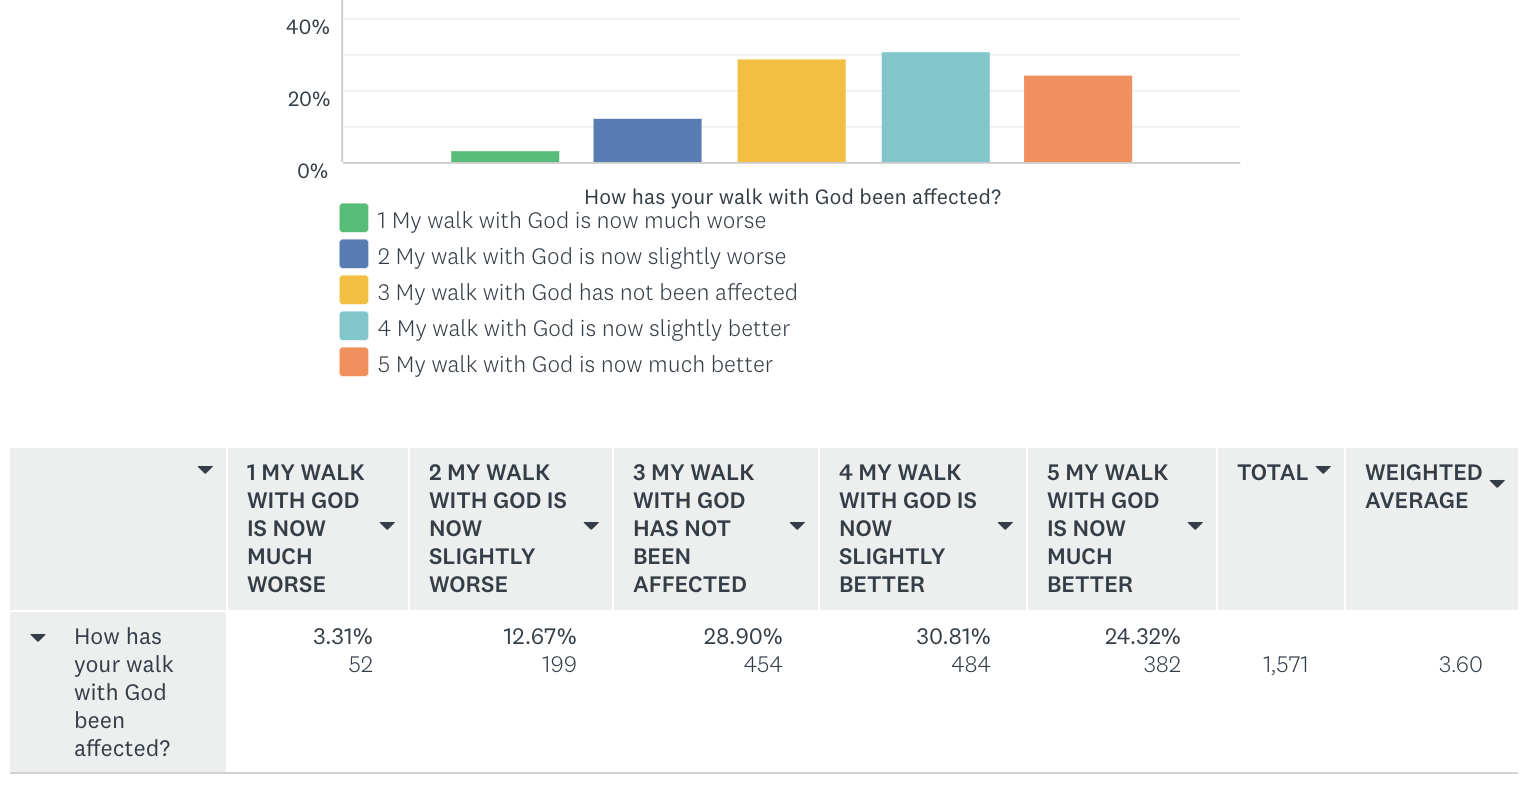 How has your walk with God been affected?